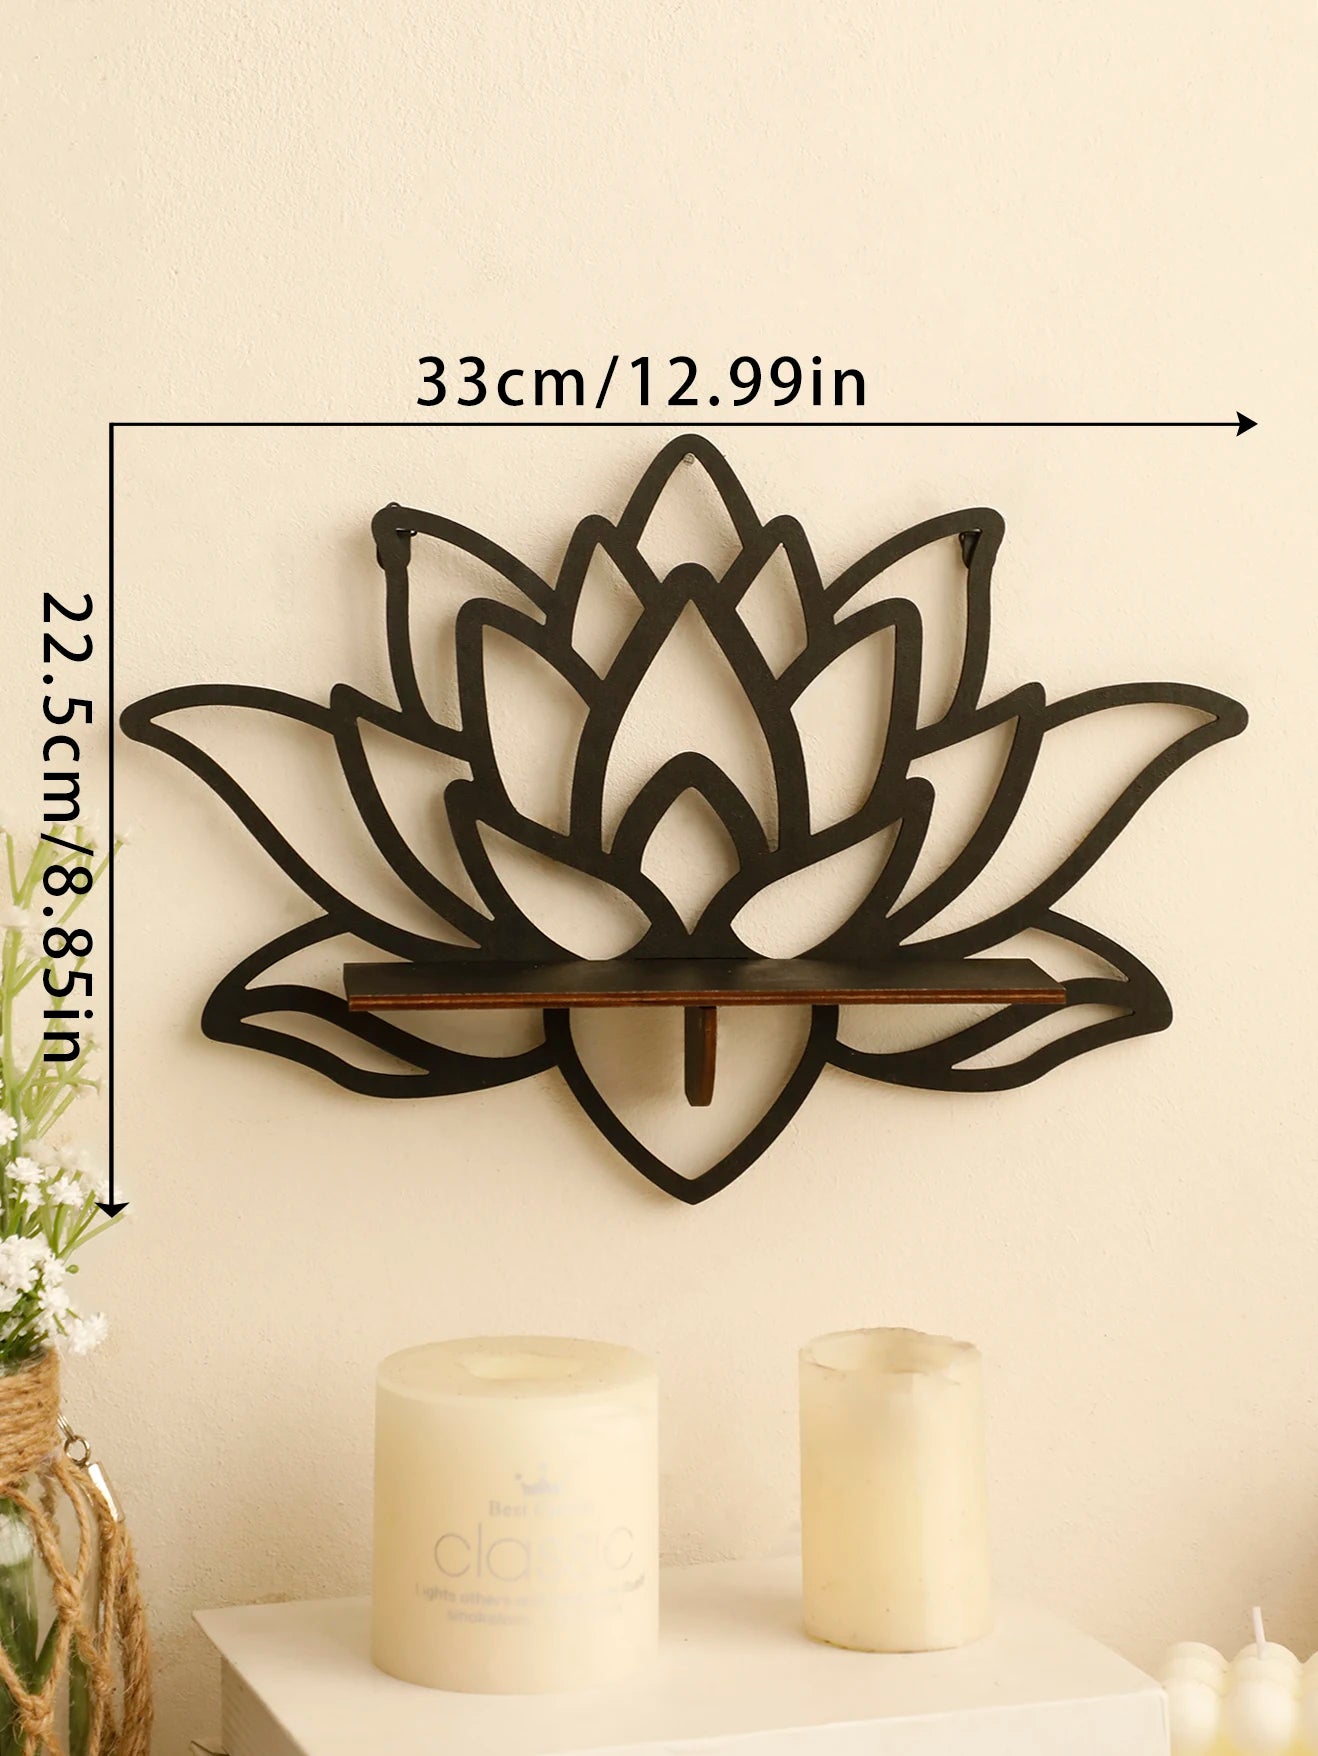 1 Pc Lotus Crystal Shelf Display Essential Oil Rack Candles Stone Floating Wall Shelf Modern Home Decoration Wall Decor Gift - Bee's to Find